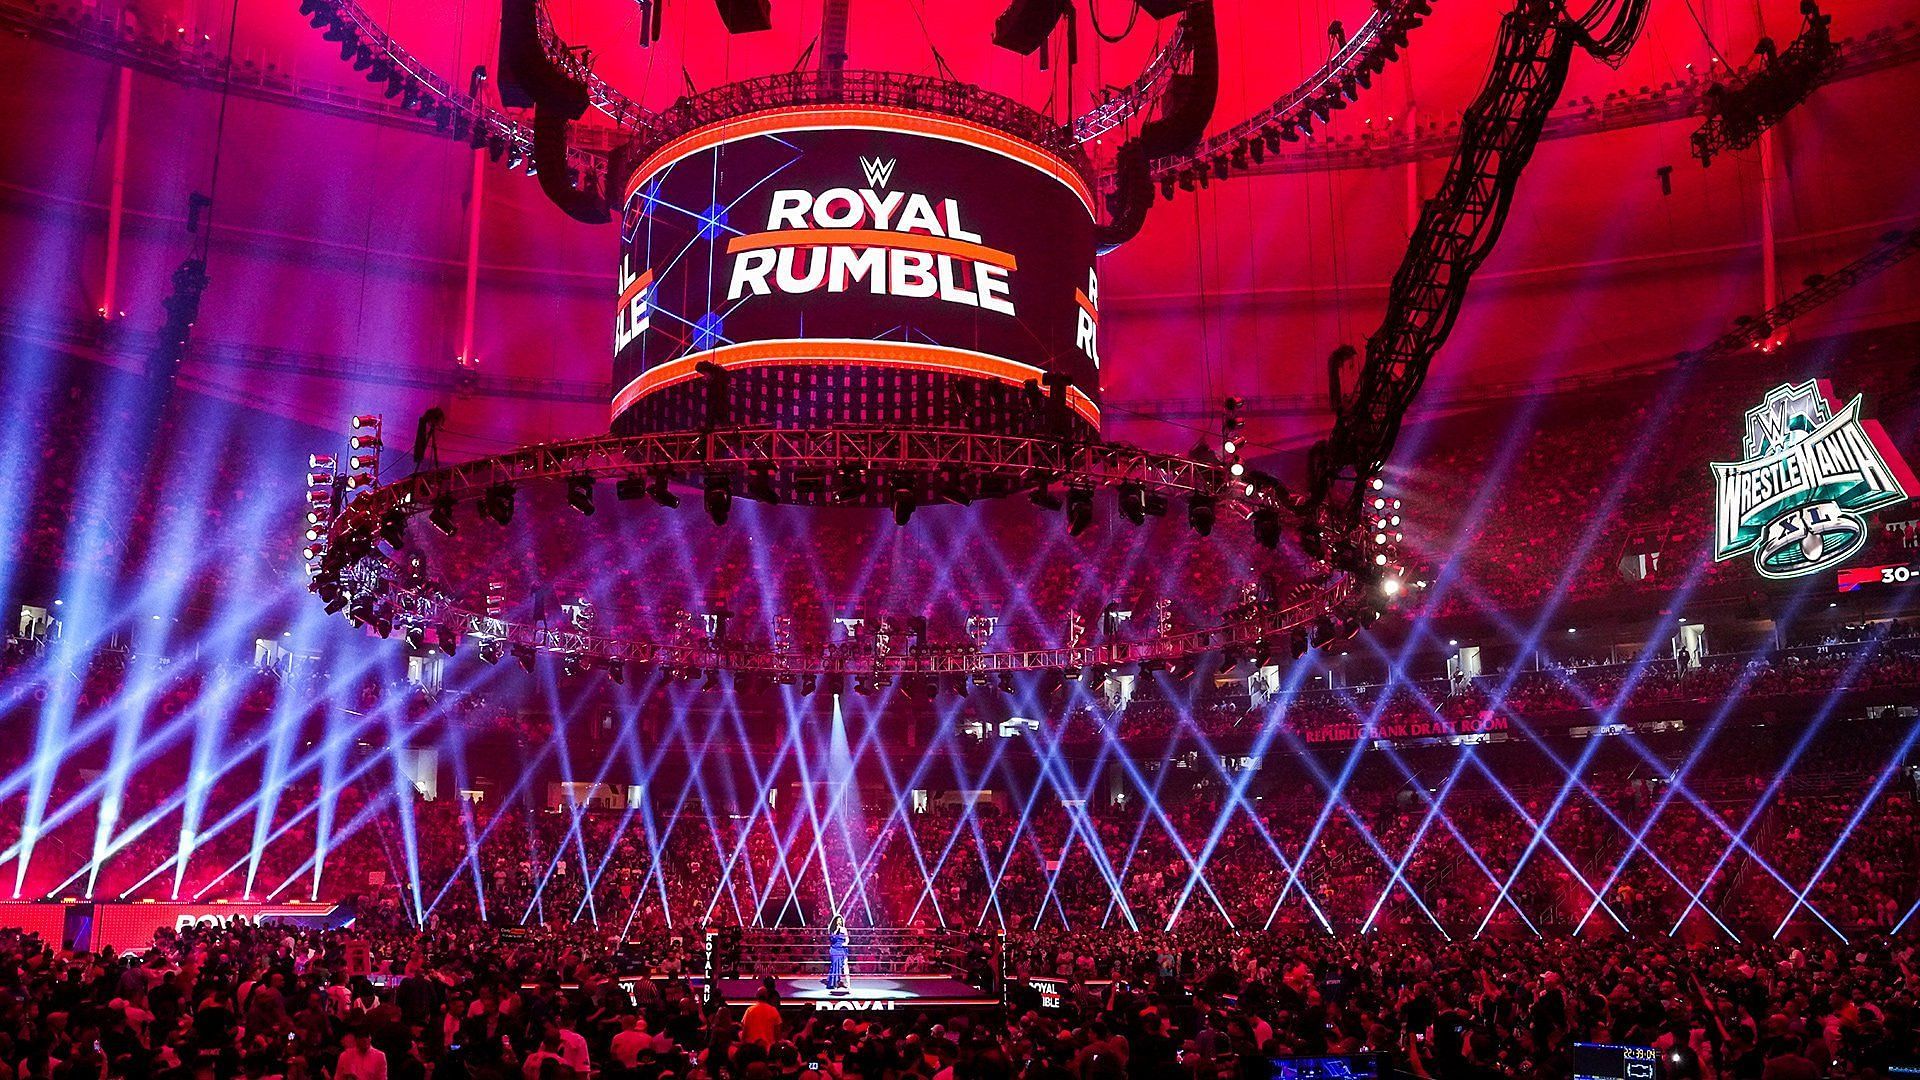 The WWE Universe packs Tropicana Field for the Royal Rumble